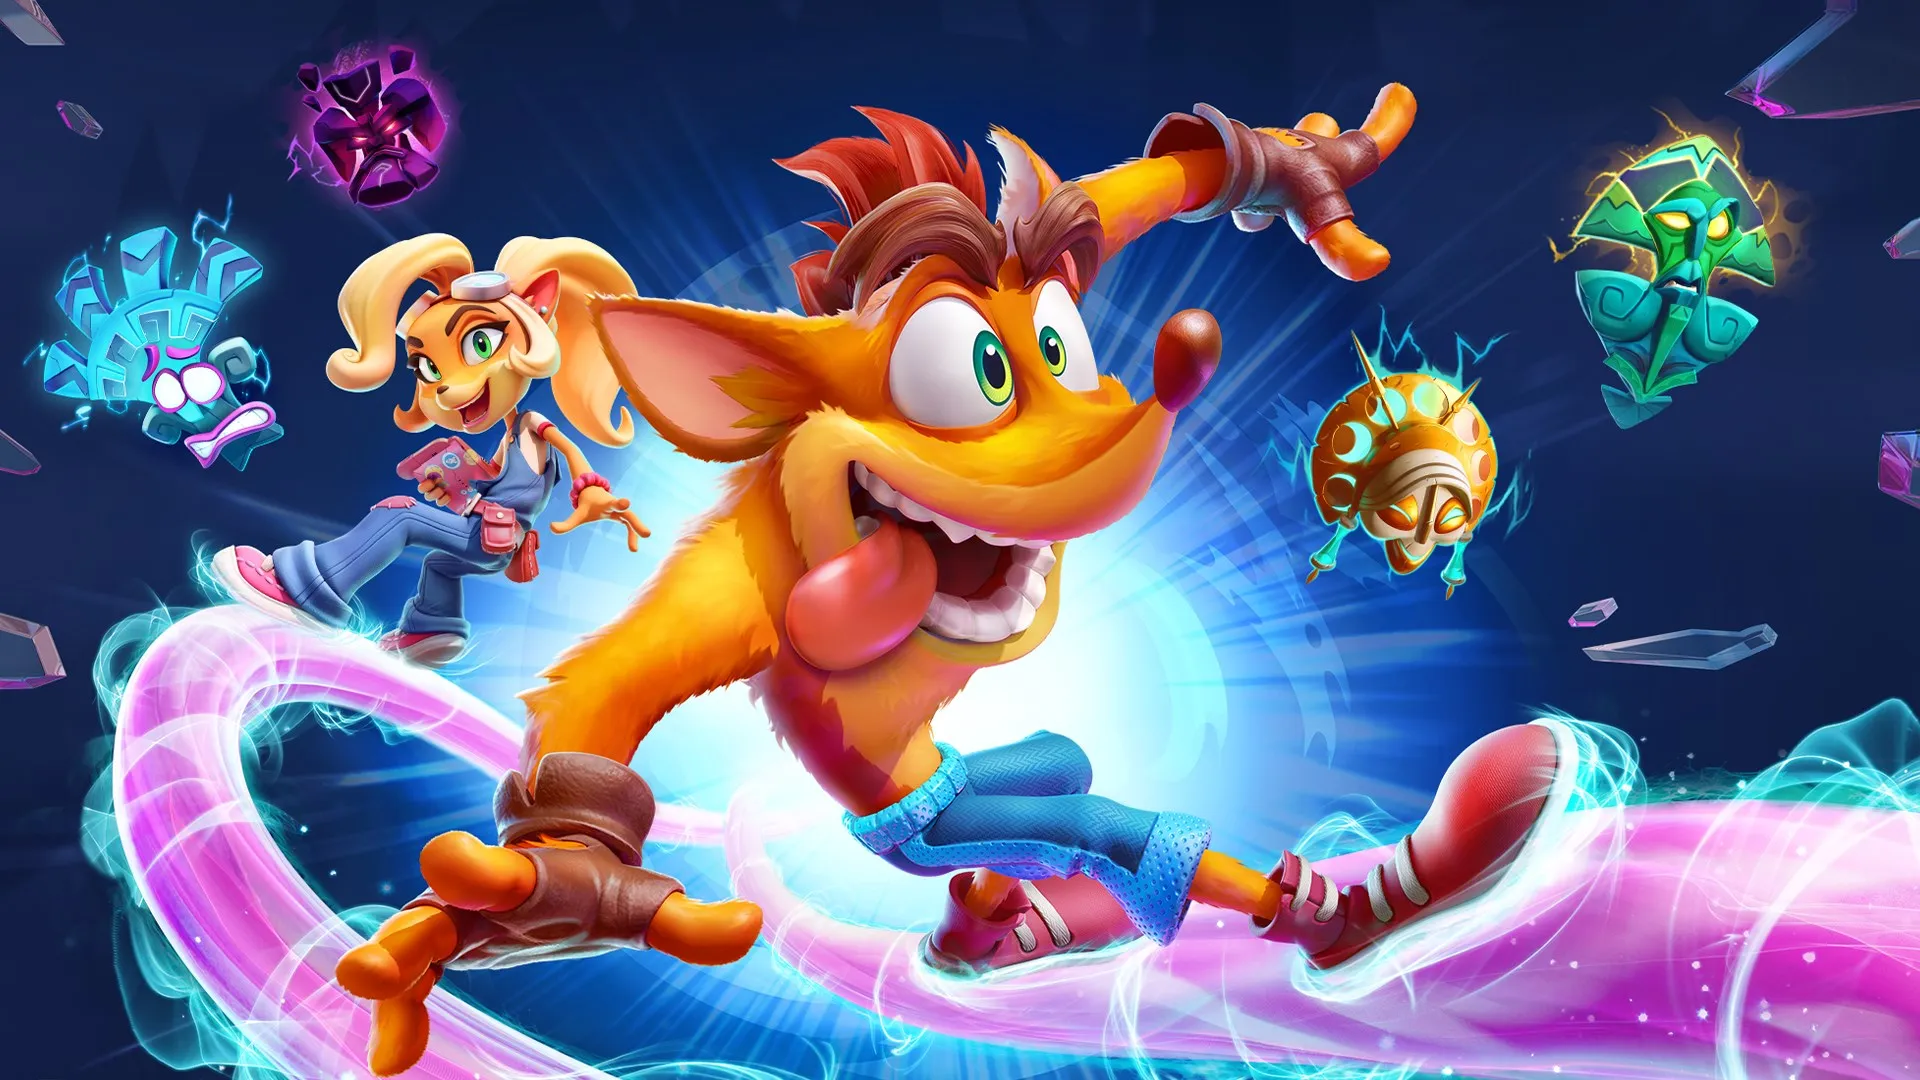 Crash Bandicoot™ 4: It's About Time – A Hands-On Look at the Game